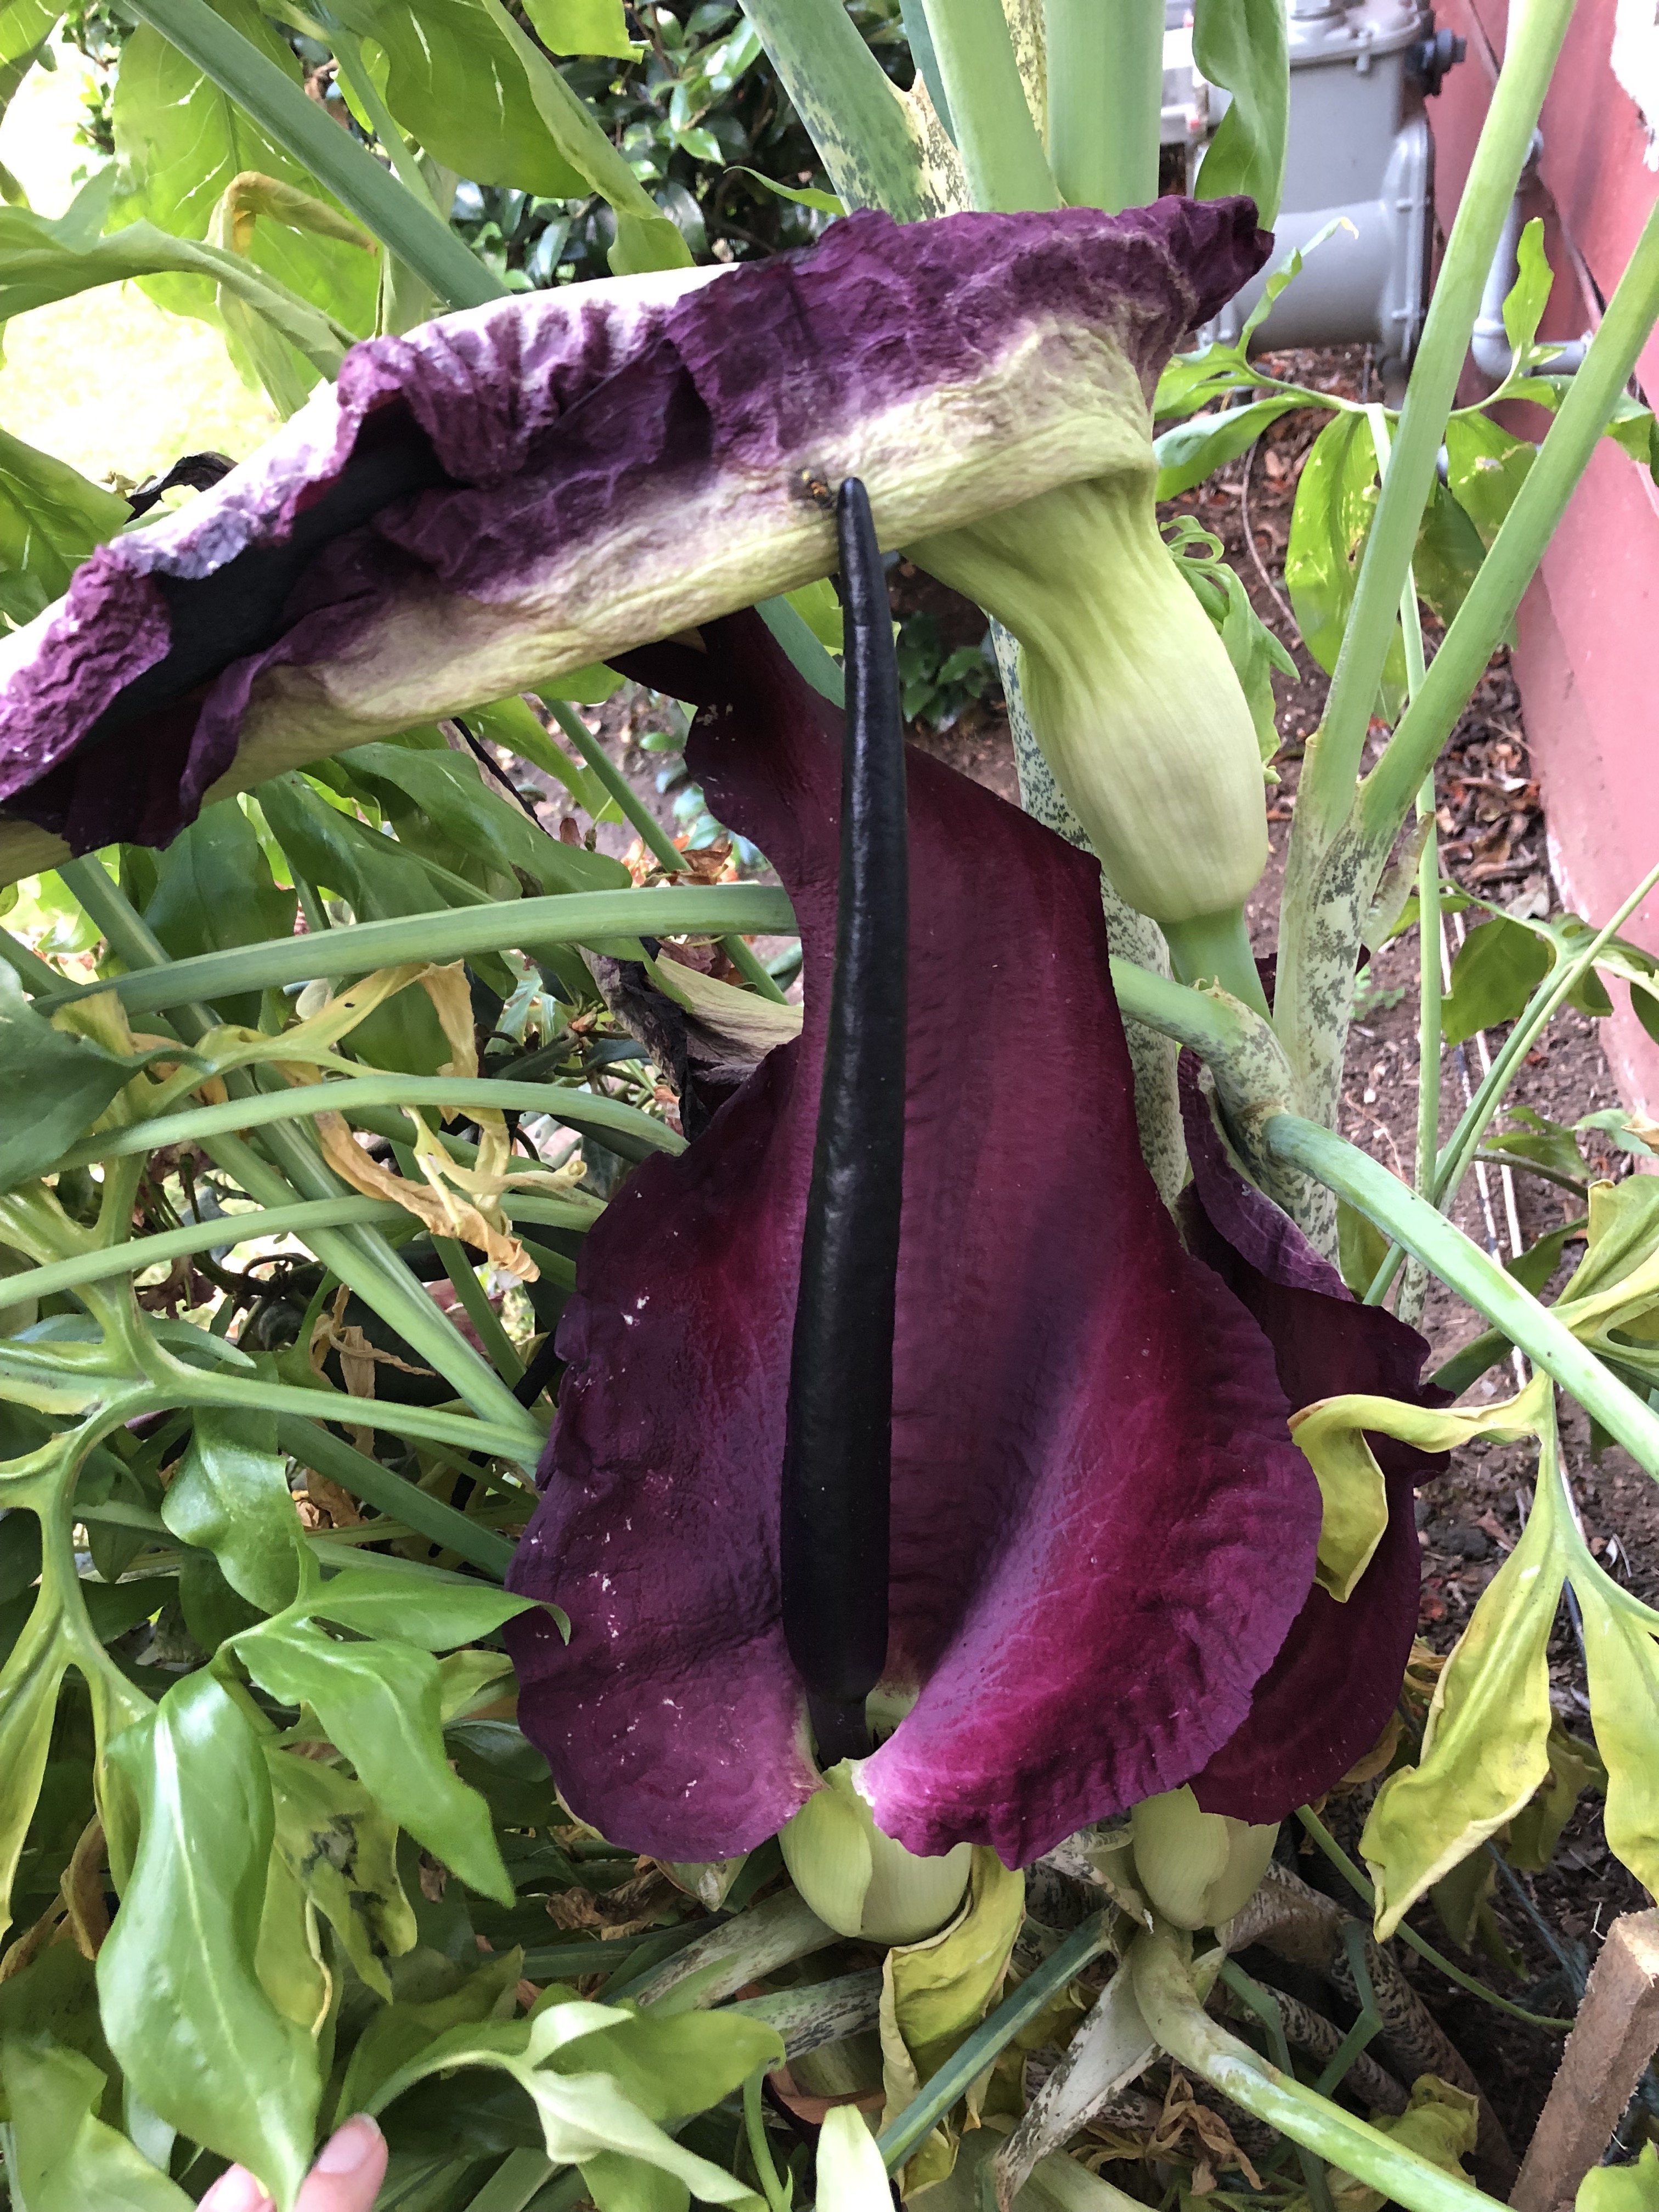 A large purple flower with a large, single black stamen.